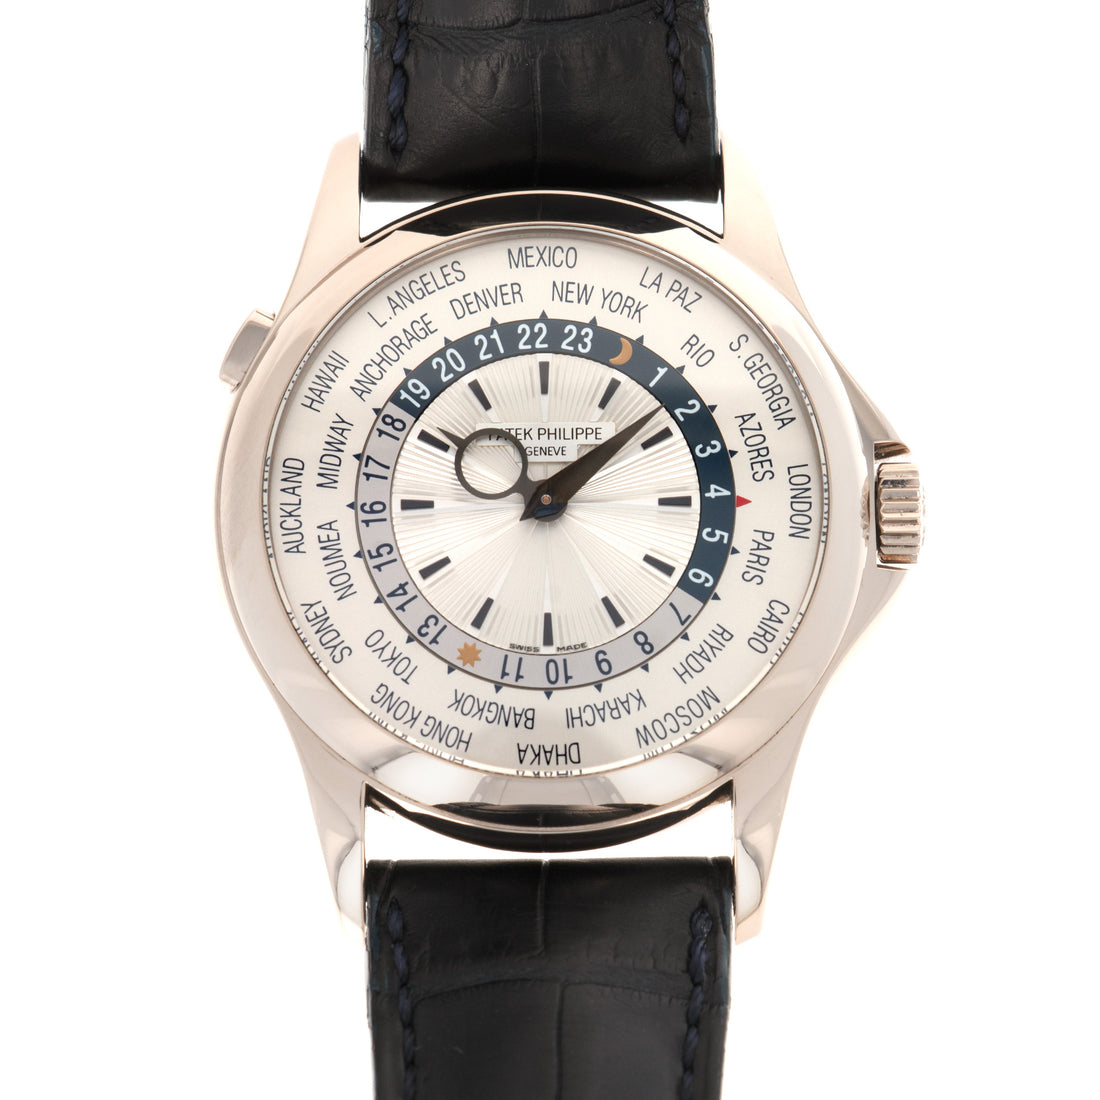 Patek Philippe White Gold World Time Watch Ref. 5130, Retailed by Tiffany & Co.